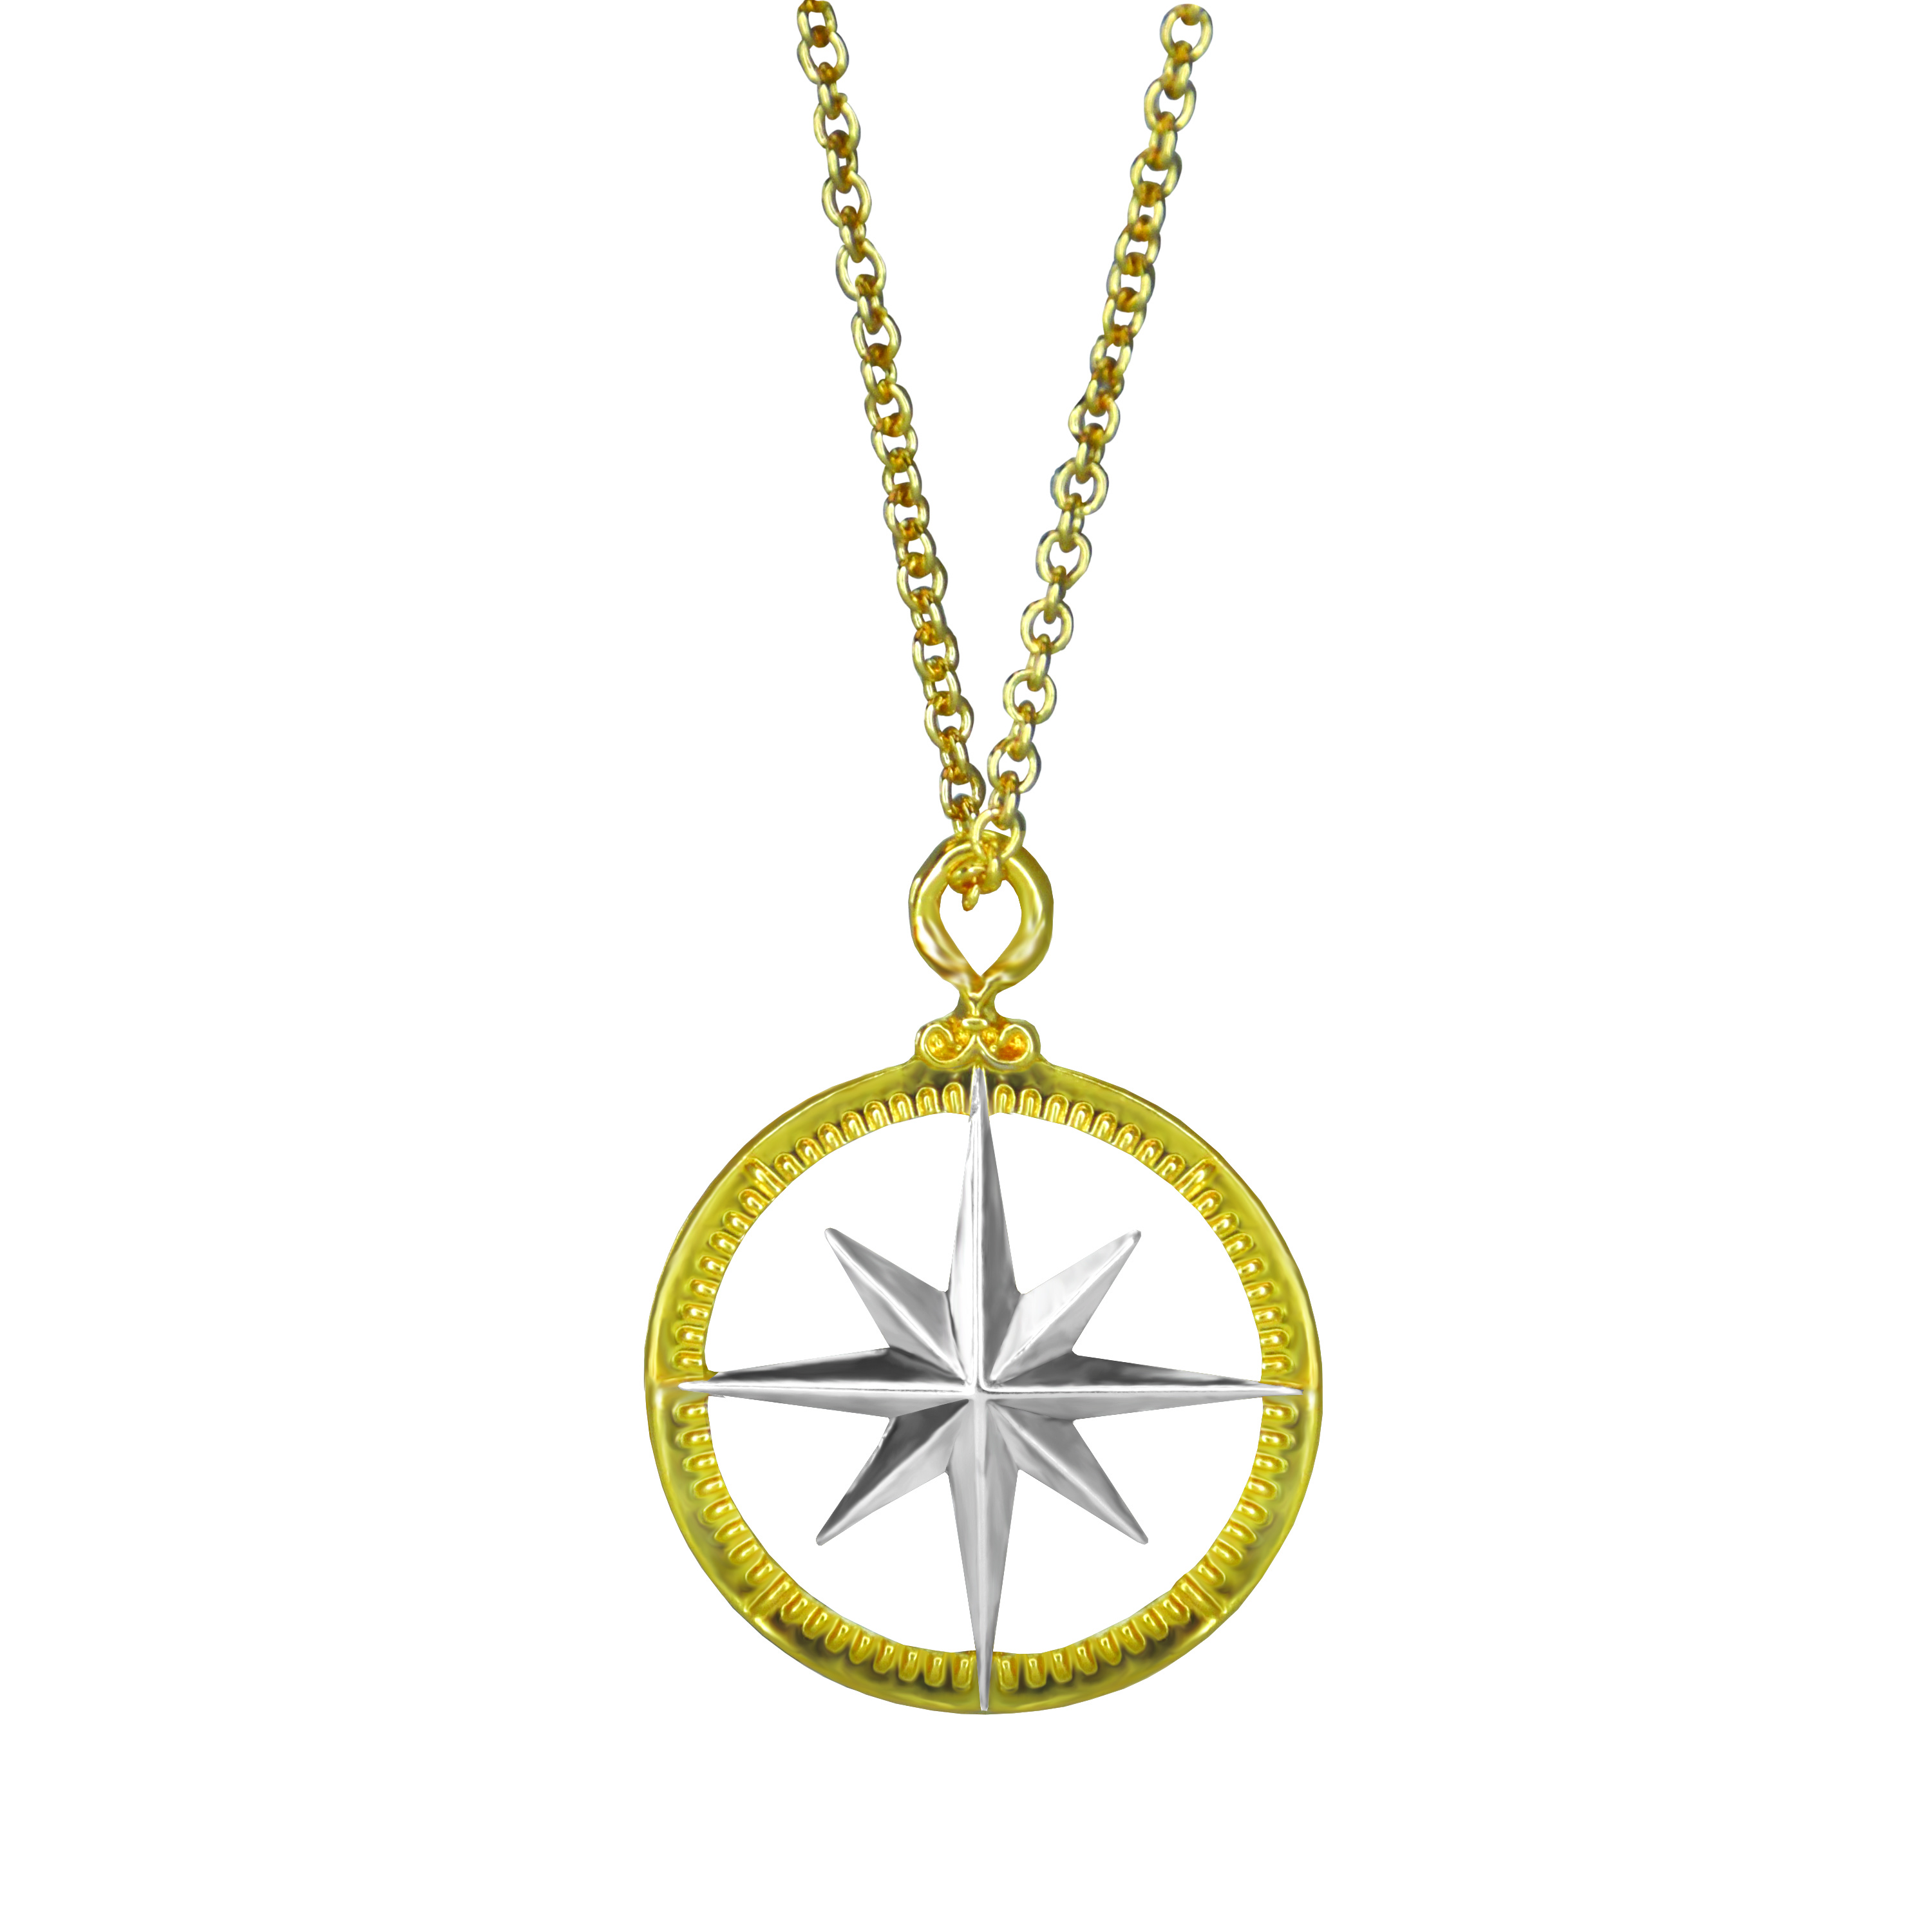 RM - Necklace - My Missionary Compass Necklace<BR>ネックレス - 宣教師 コンパス【日本在庫１点】